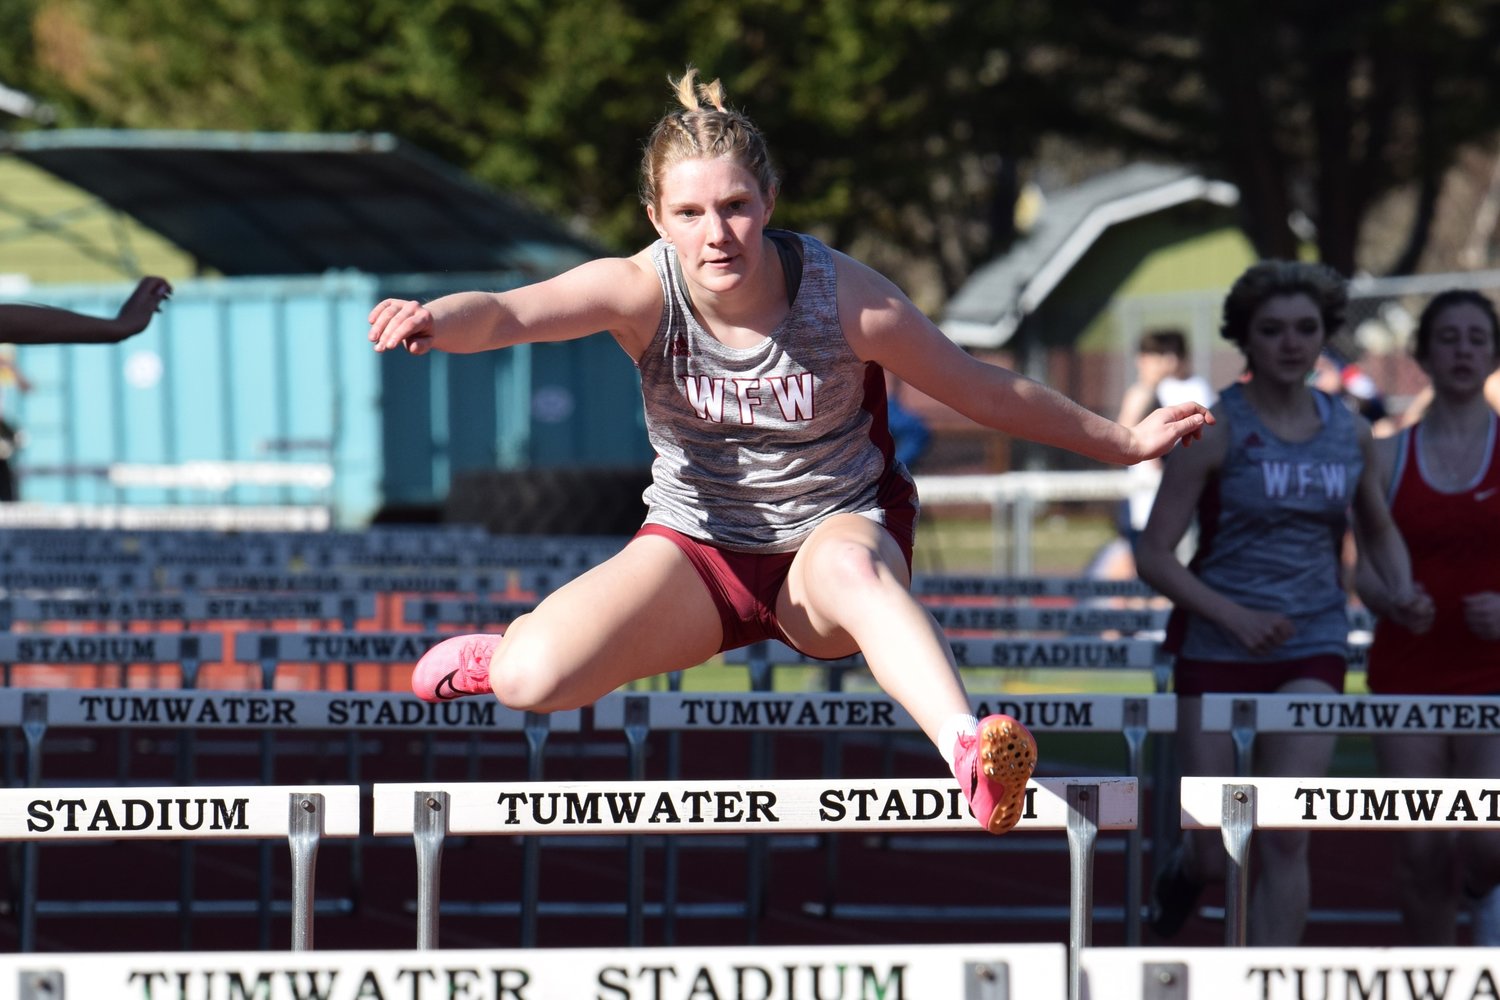 W.F. West's Emily Mallonee leaps over a hurdle at Tumwater District Stadium March 29.